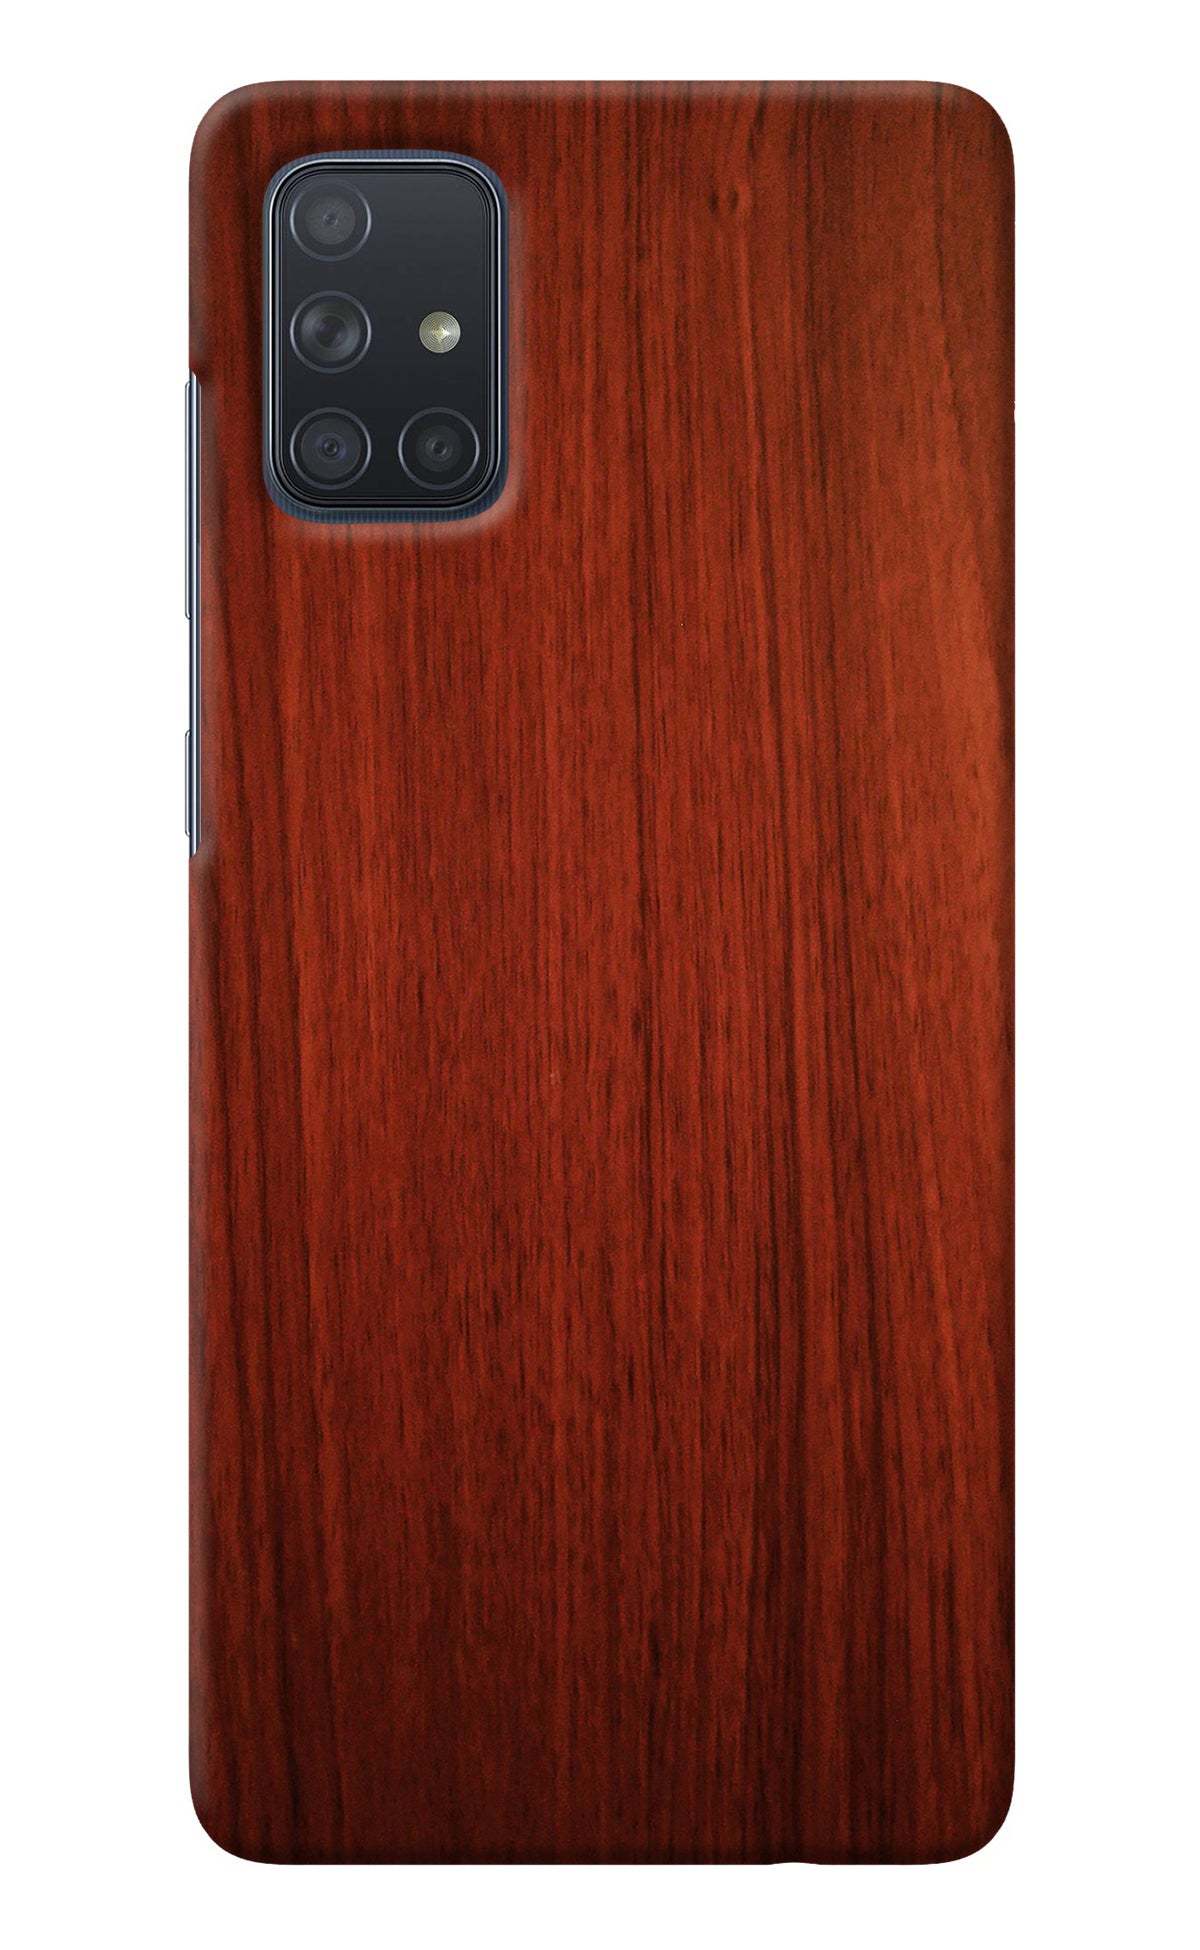 Wooden Plain Pattern Samsung A71 Back Cover